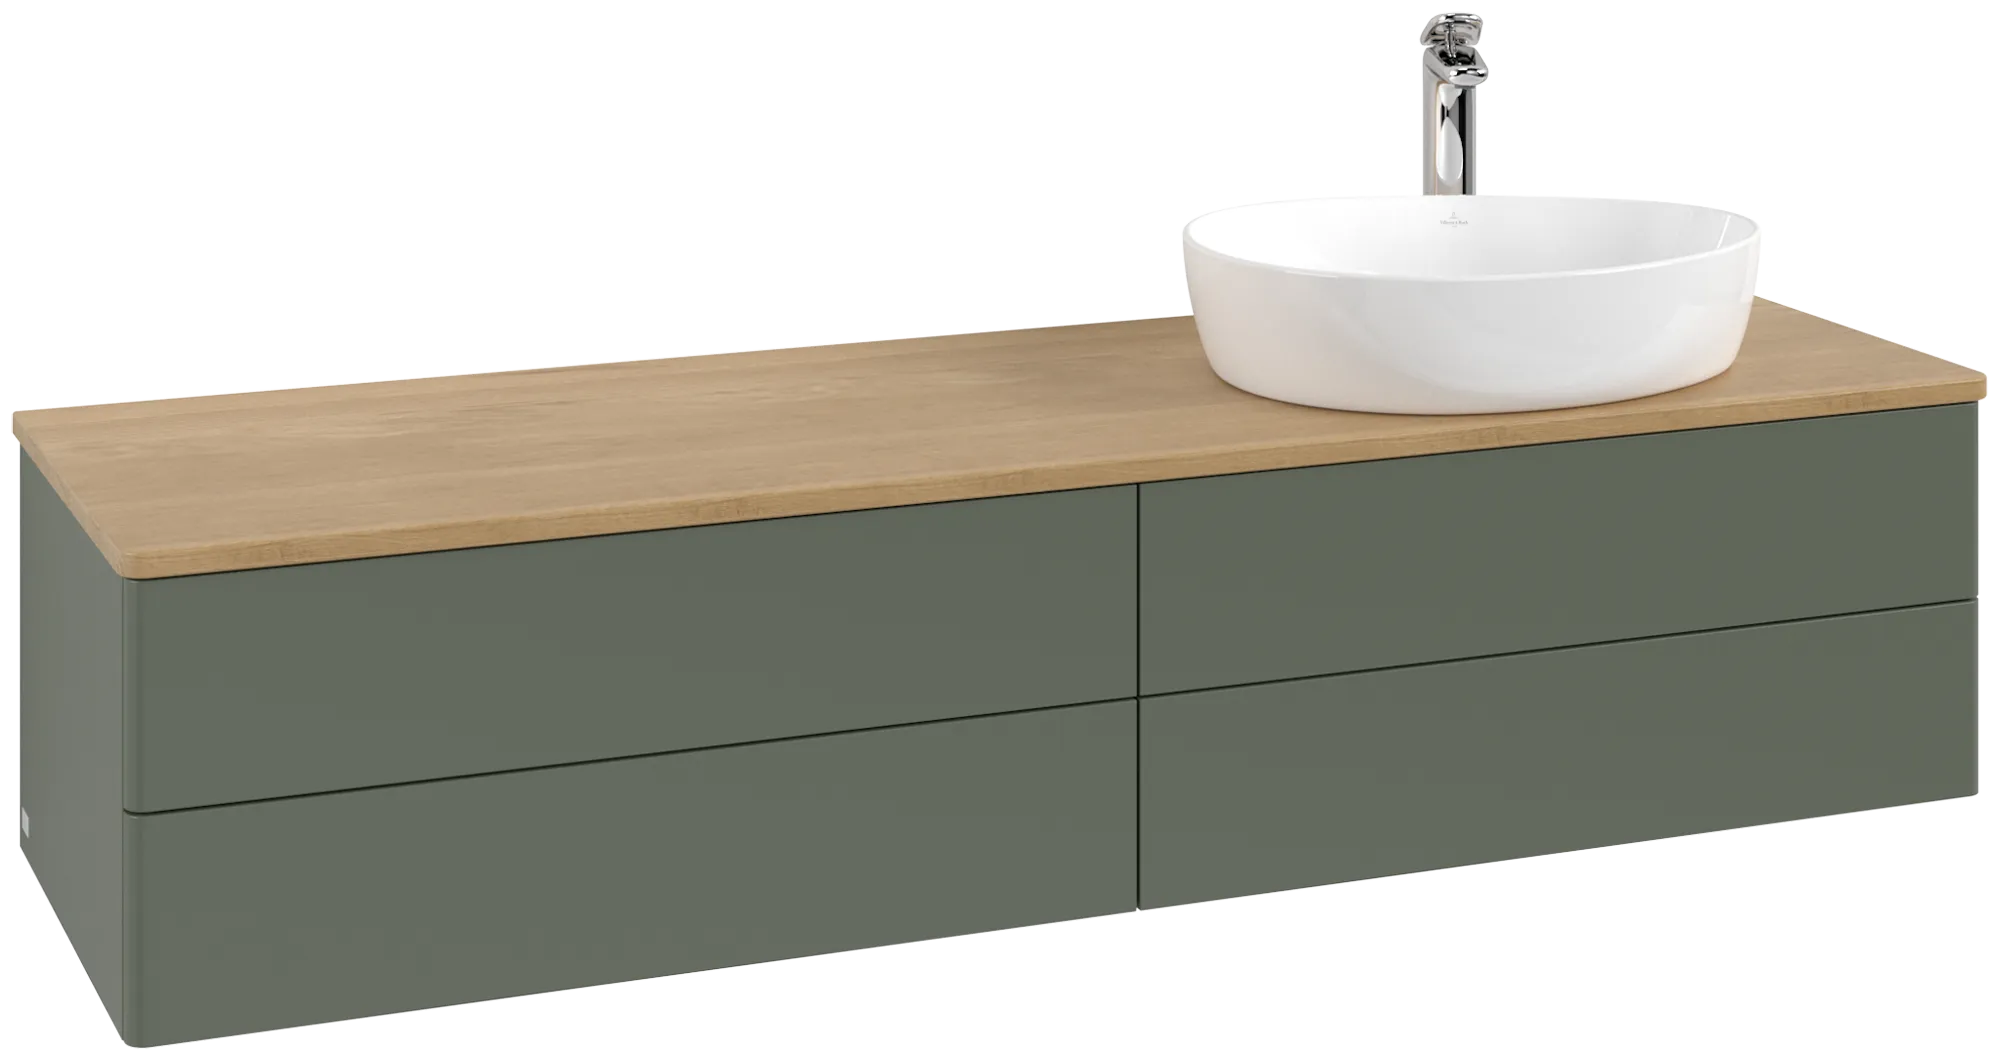 Picture of VILLEROY BOCH Antao Vanity unit, with lighting, 4 pull-out compartments, 1600 x 360 x 500 mm, Front without structure, Leaf Green Matt Lacquer / Honey Oak #L27051HL